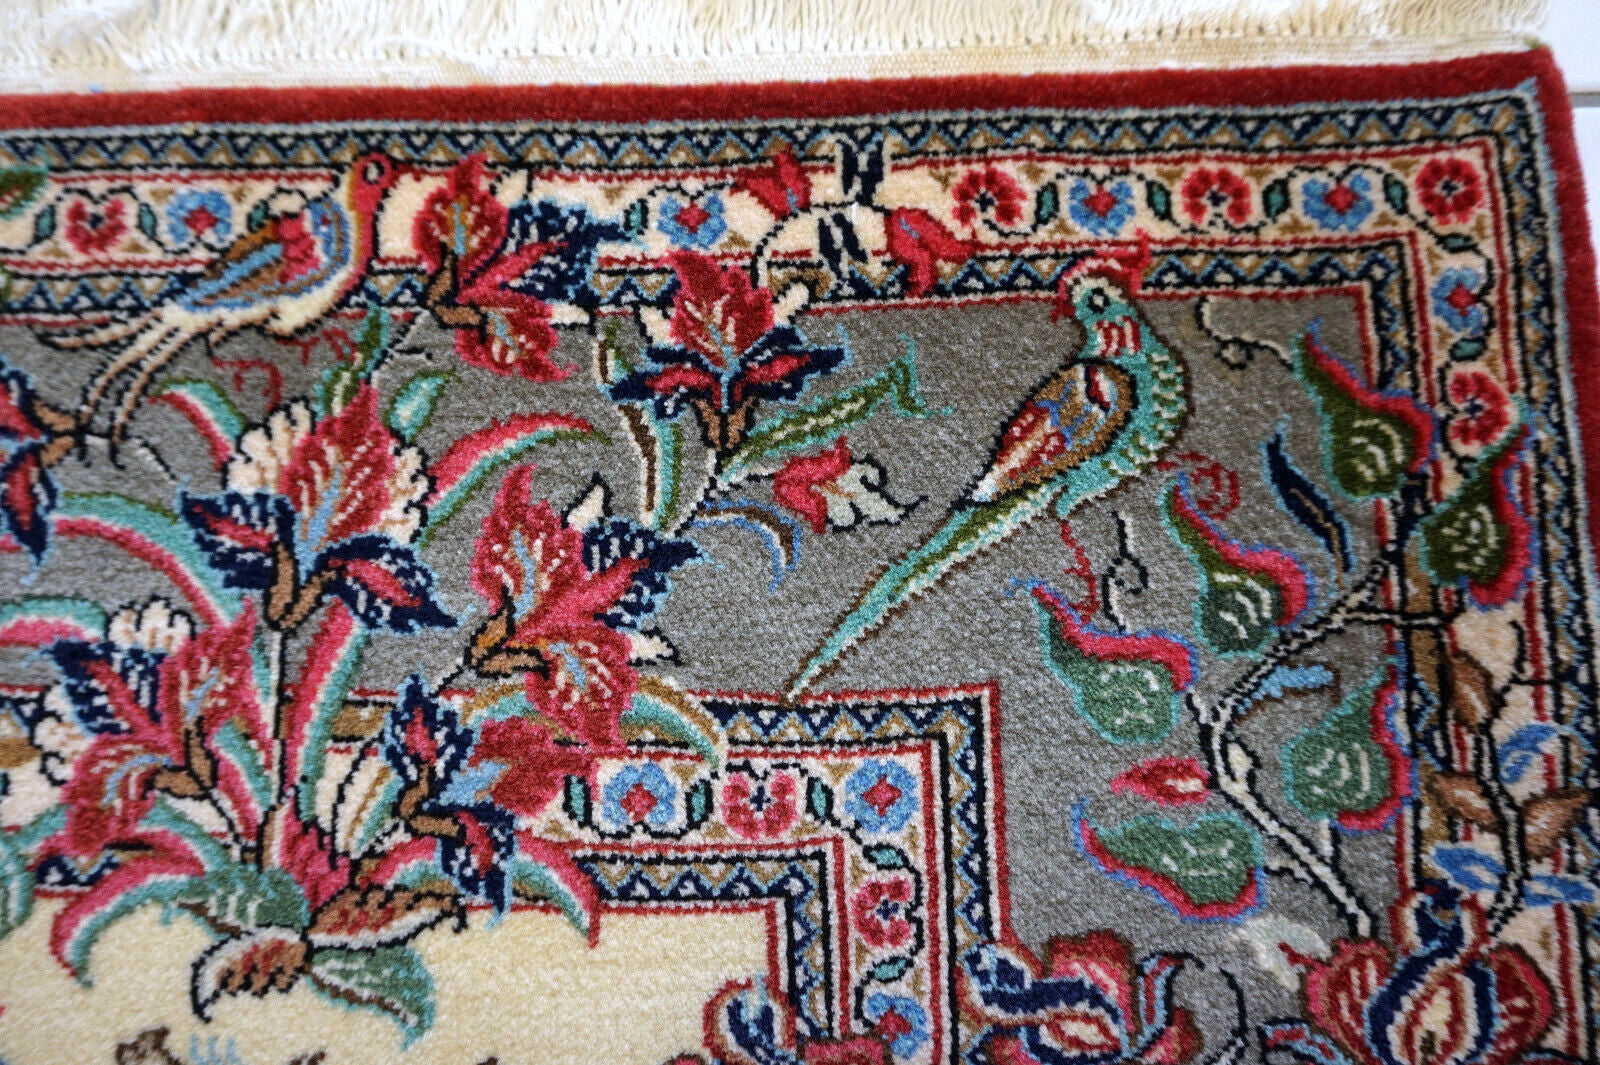 A corner of the vintage Qum rug showing the intricate weaving and detail.